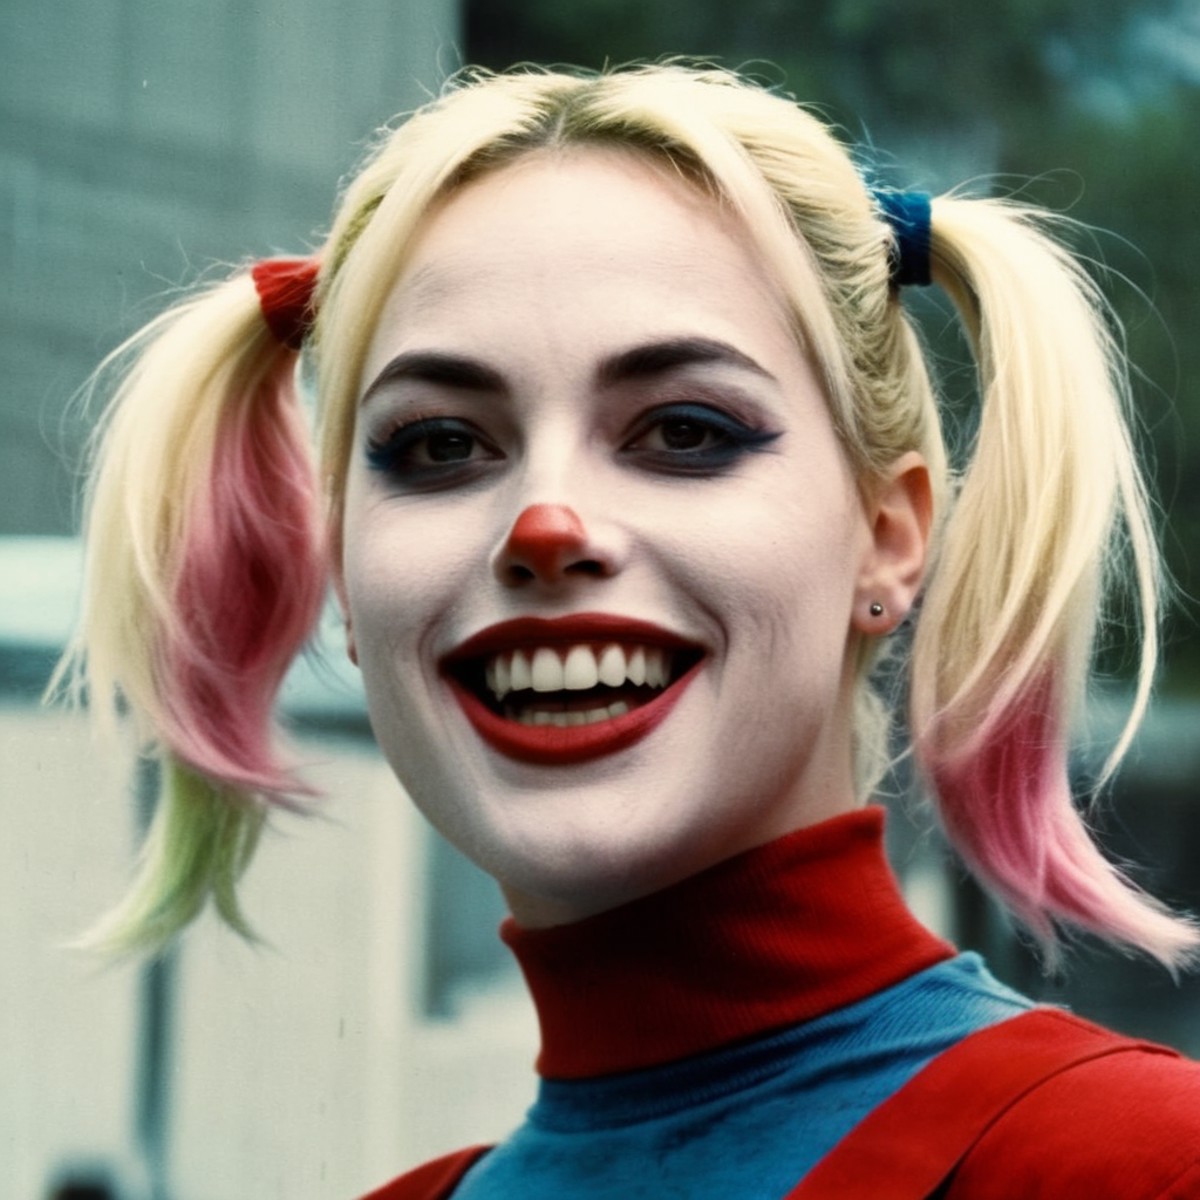 analog film photo of  <lora:Kodak Motion Picture Film Style v4:1>
Best Cinematic horror Picture of harley quinn a crazy lo...